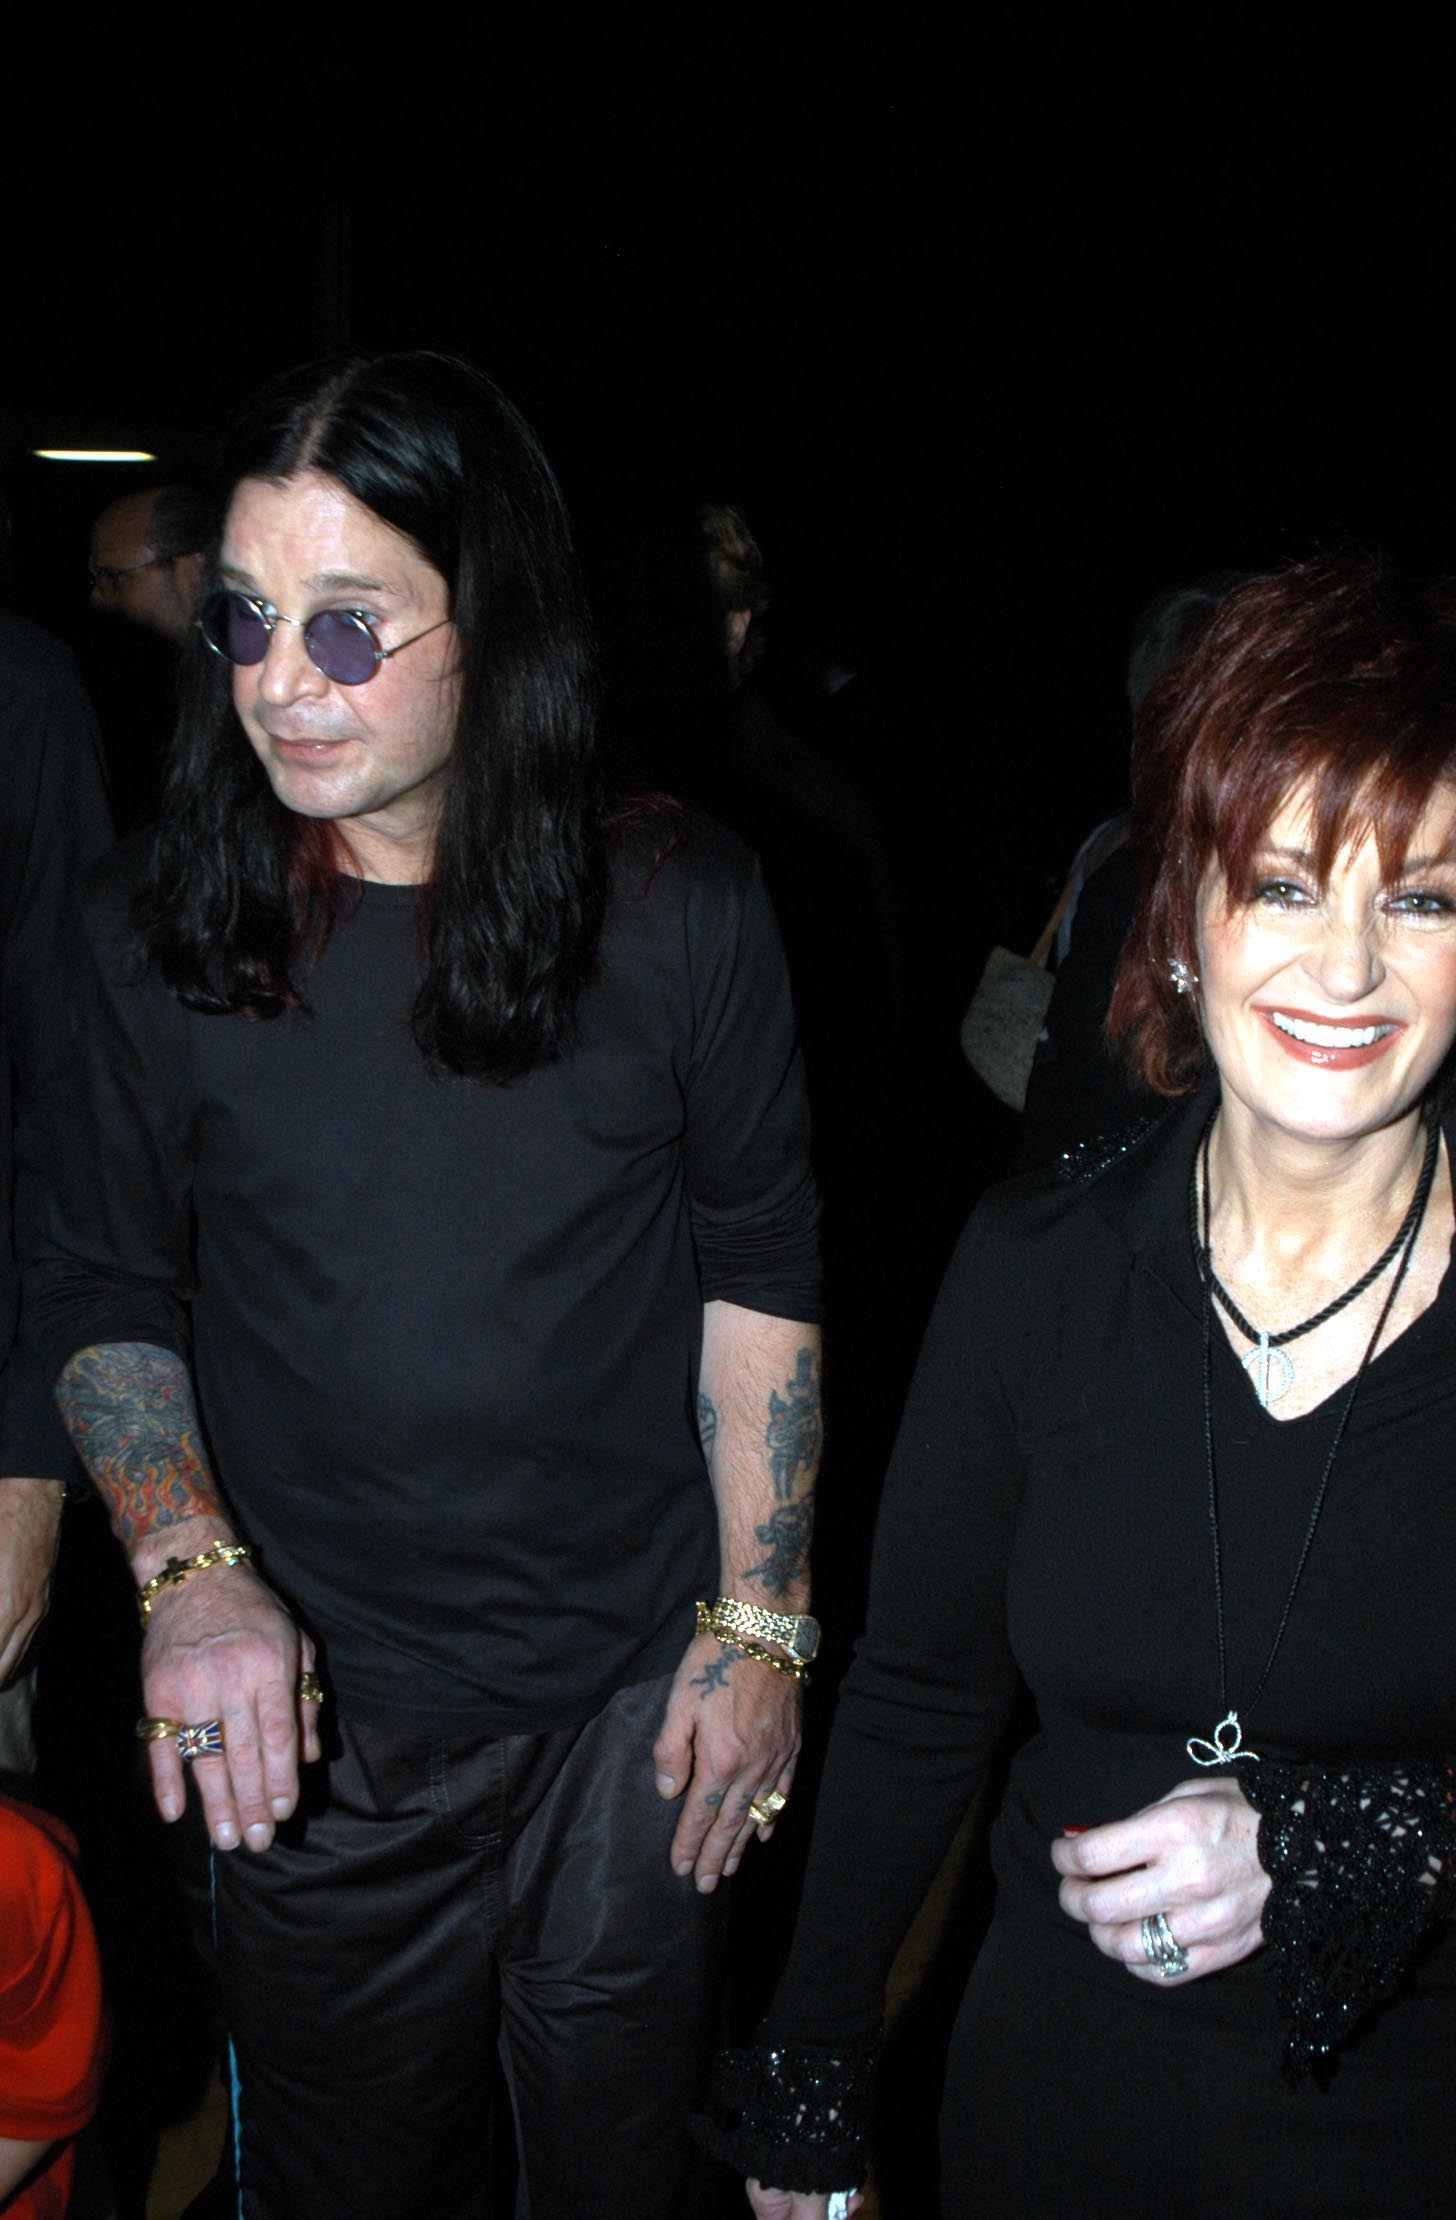 Ozzy Osbourne and Sharon Osbourne holding hands at an event, Ozzy in a long-sleeved shirt and Sharon in a embellished outfit